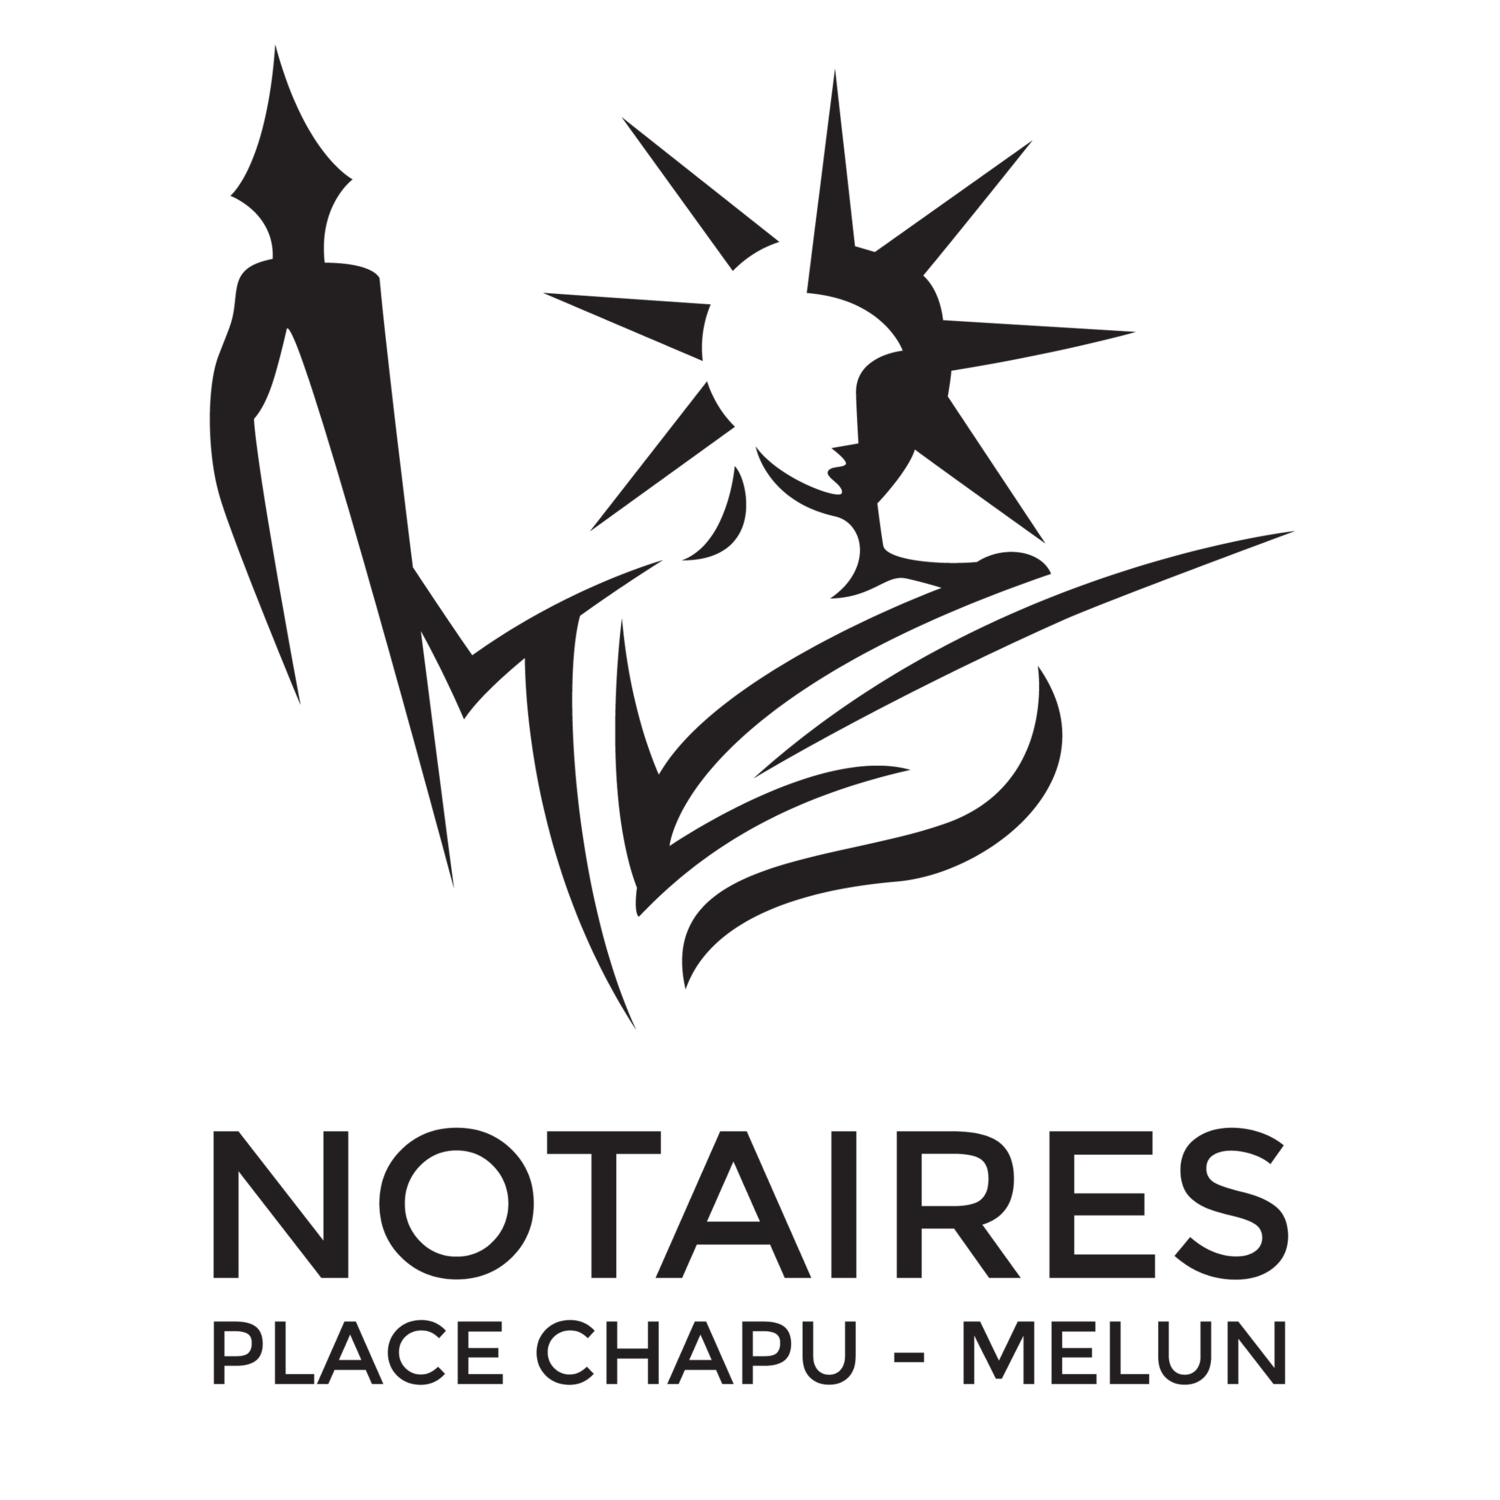 NOTAIRES - Place Chapu - Melun